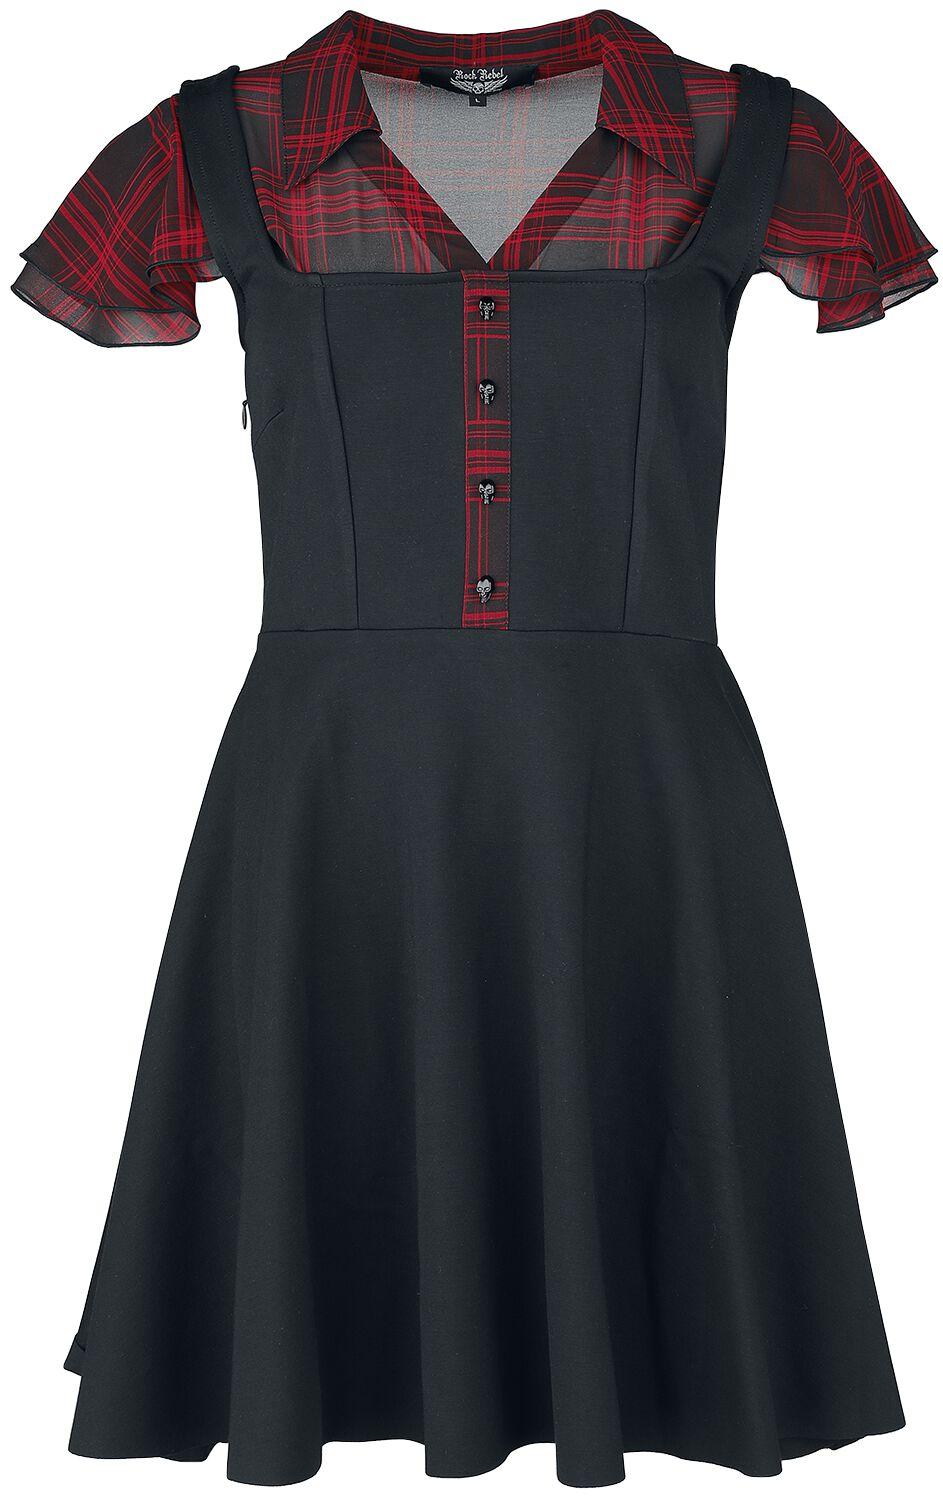 Image of Miniabito Gothic di Rock Rebel by EMP - Layered-effect dress with chequered blouse - M a L - Donna - rosso/nero